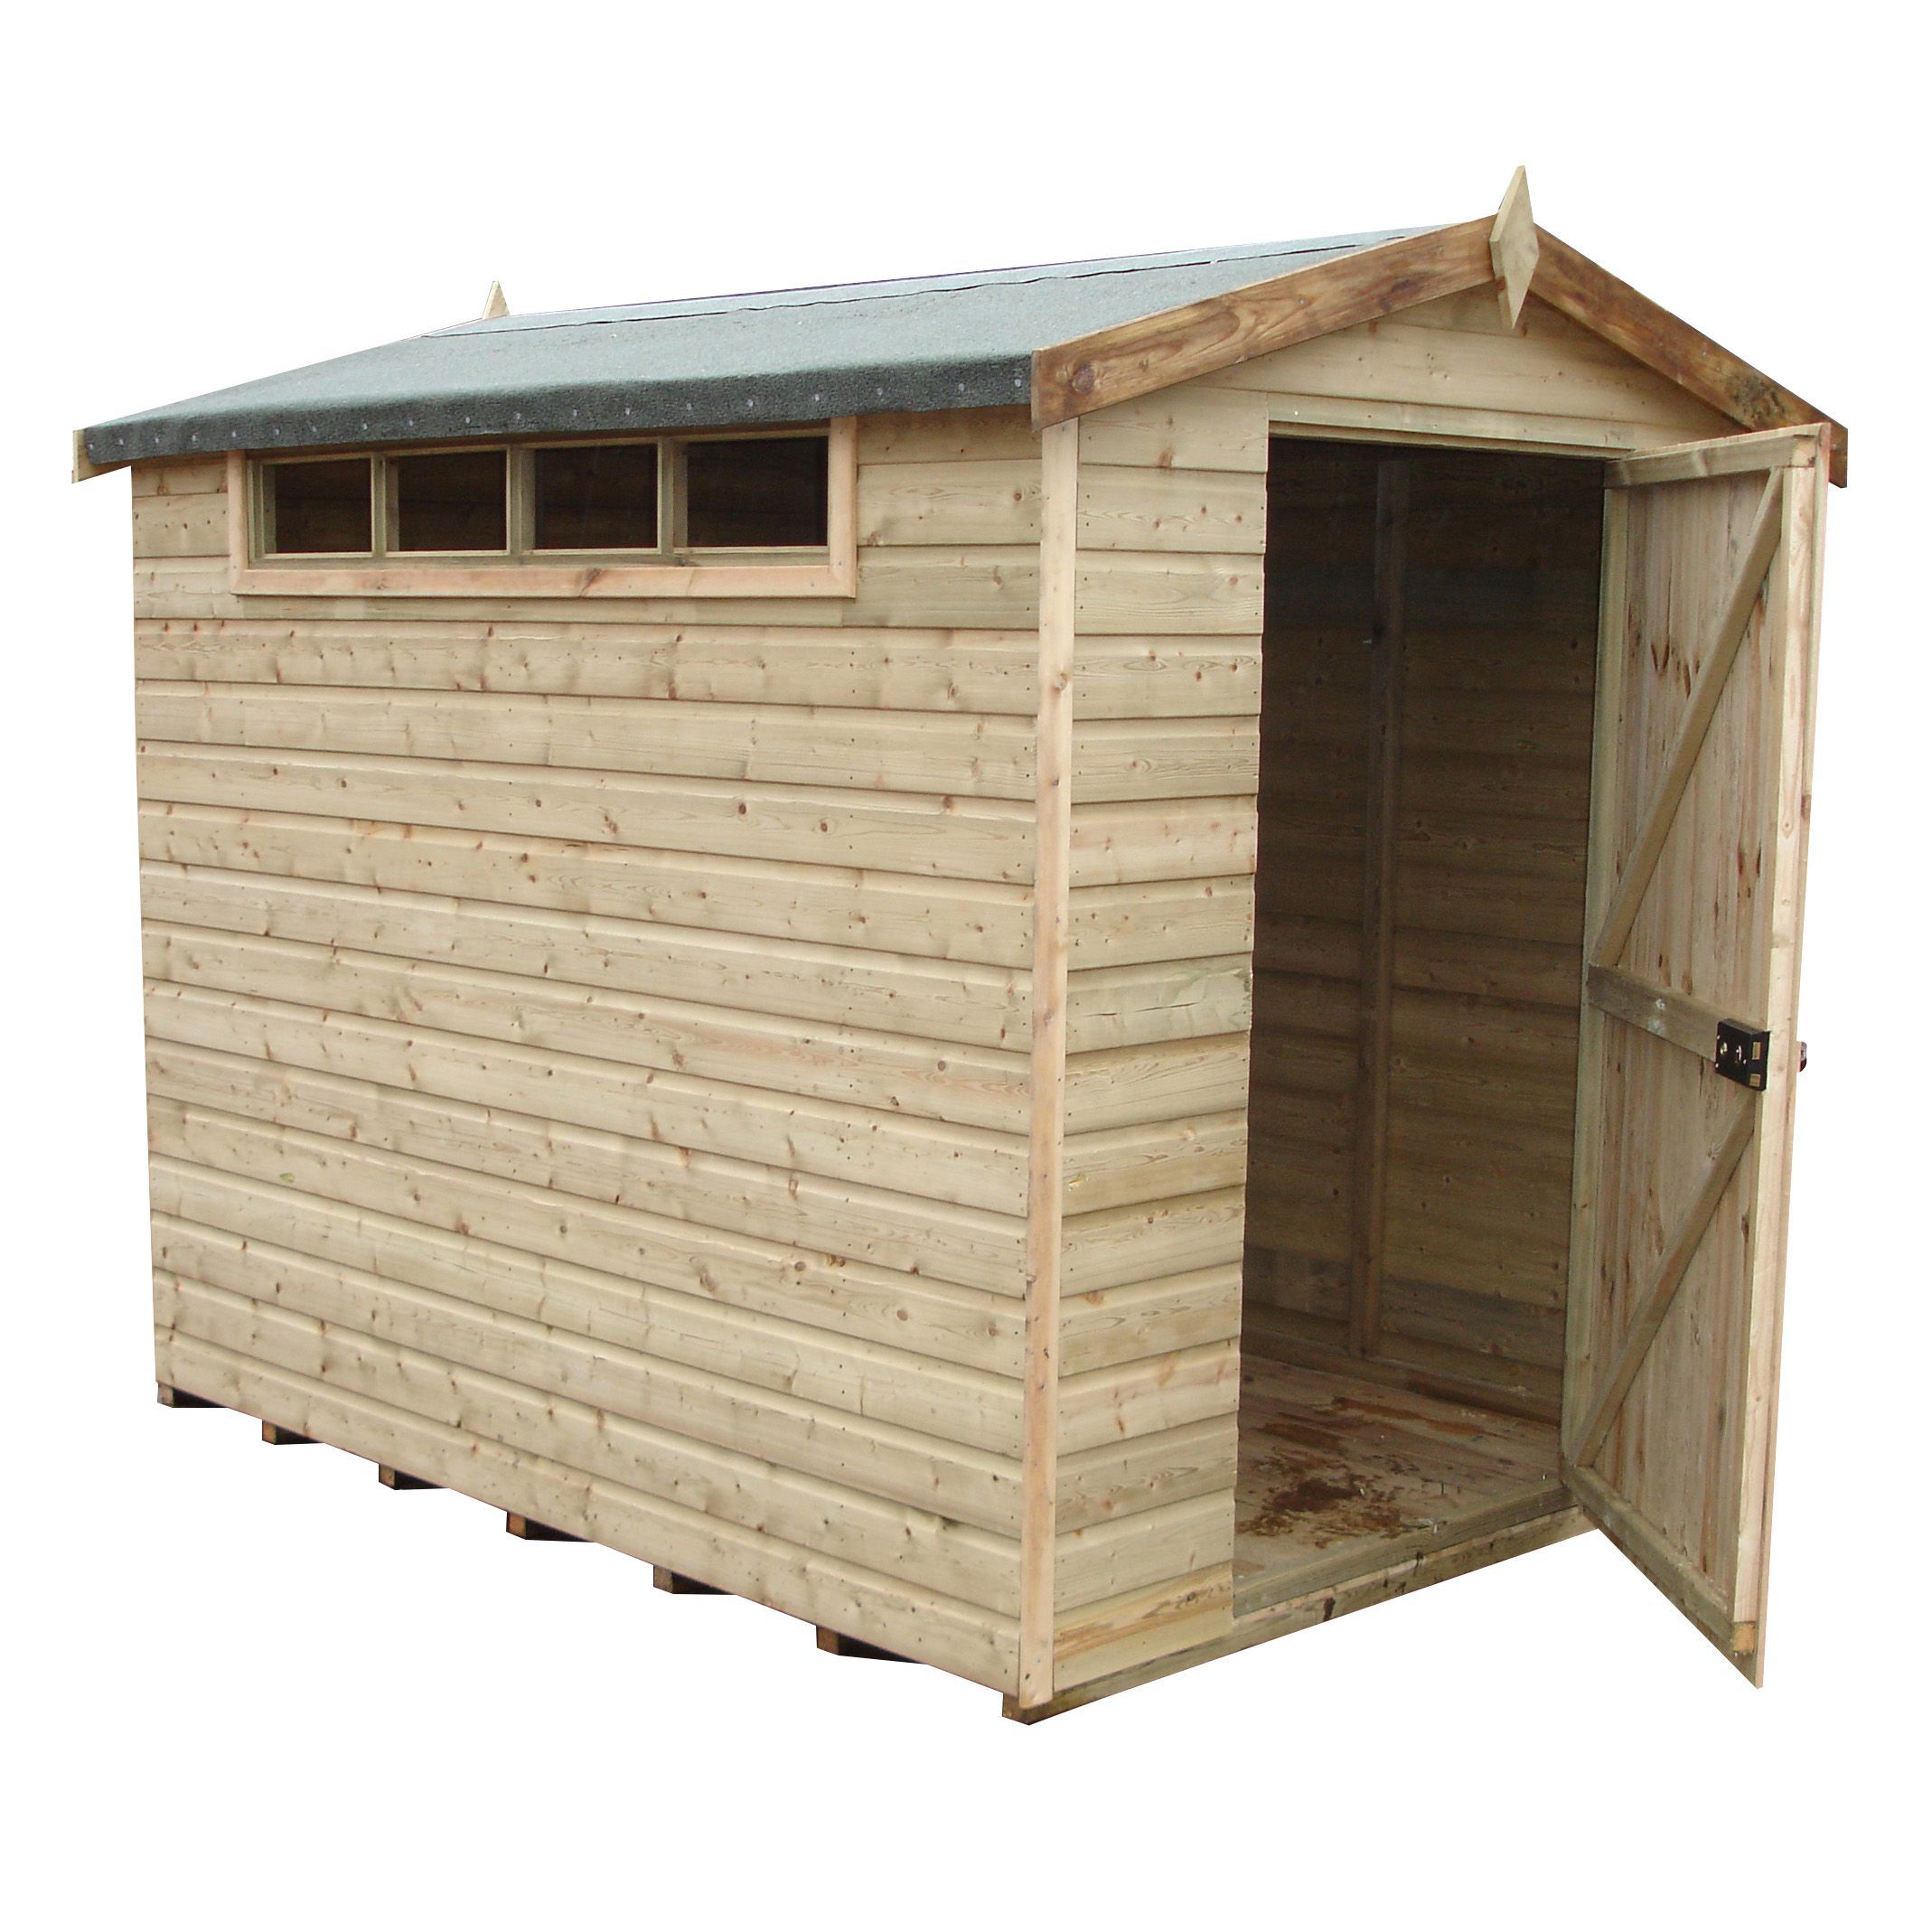 Shire 10x8 Apex Shed - Base not includedAssembly required